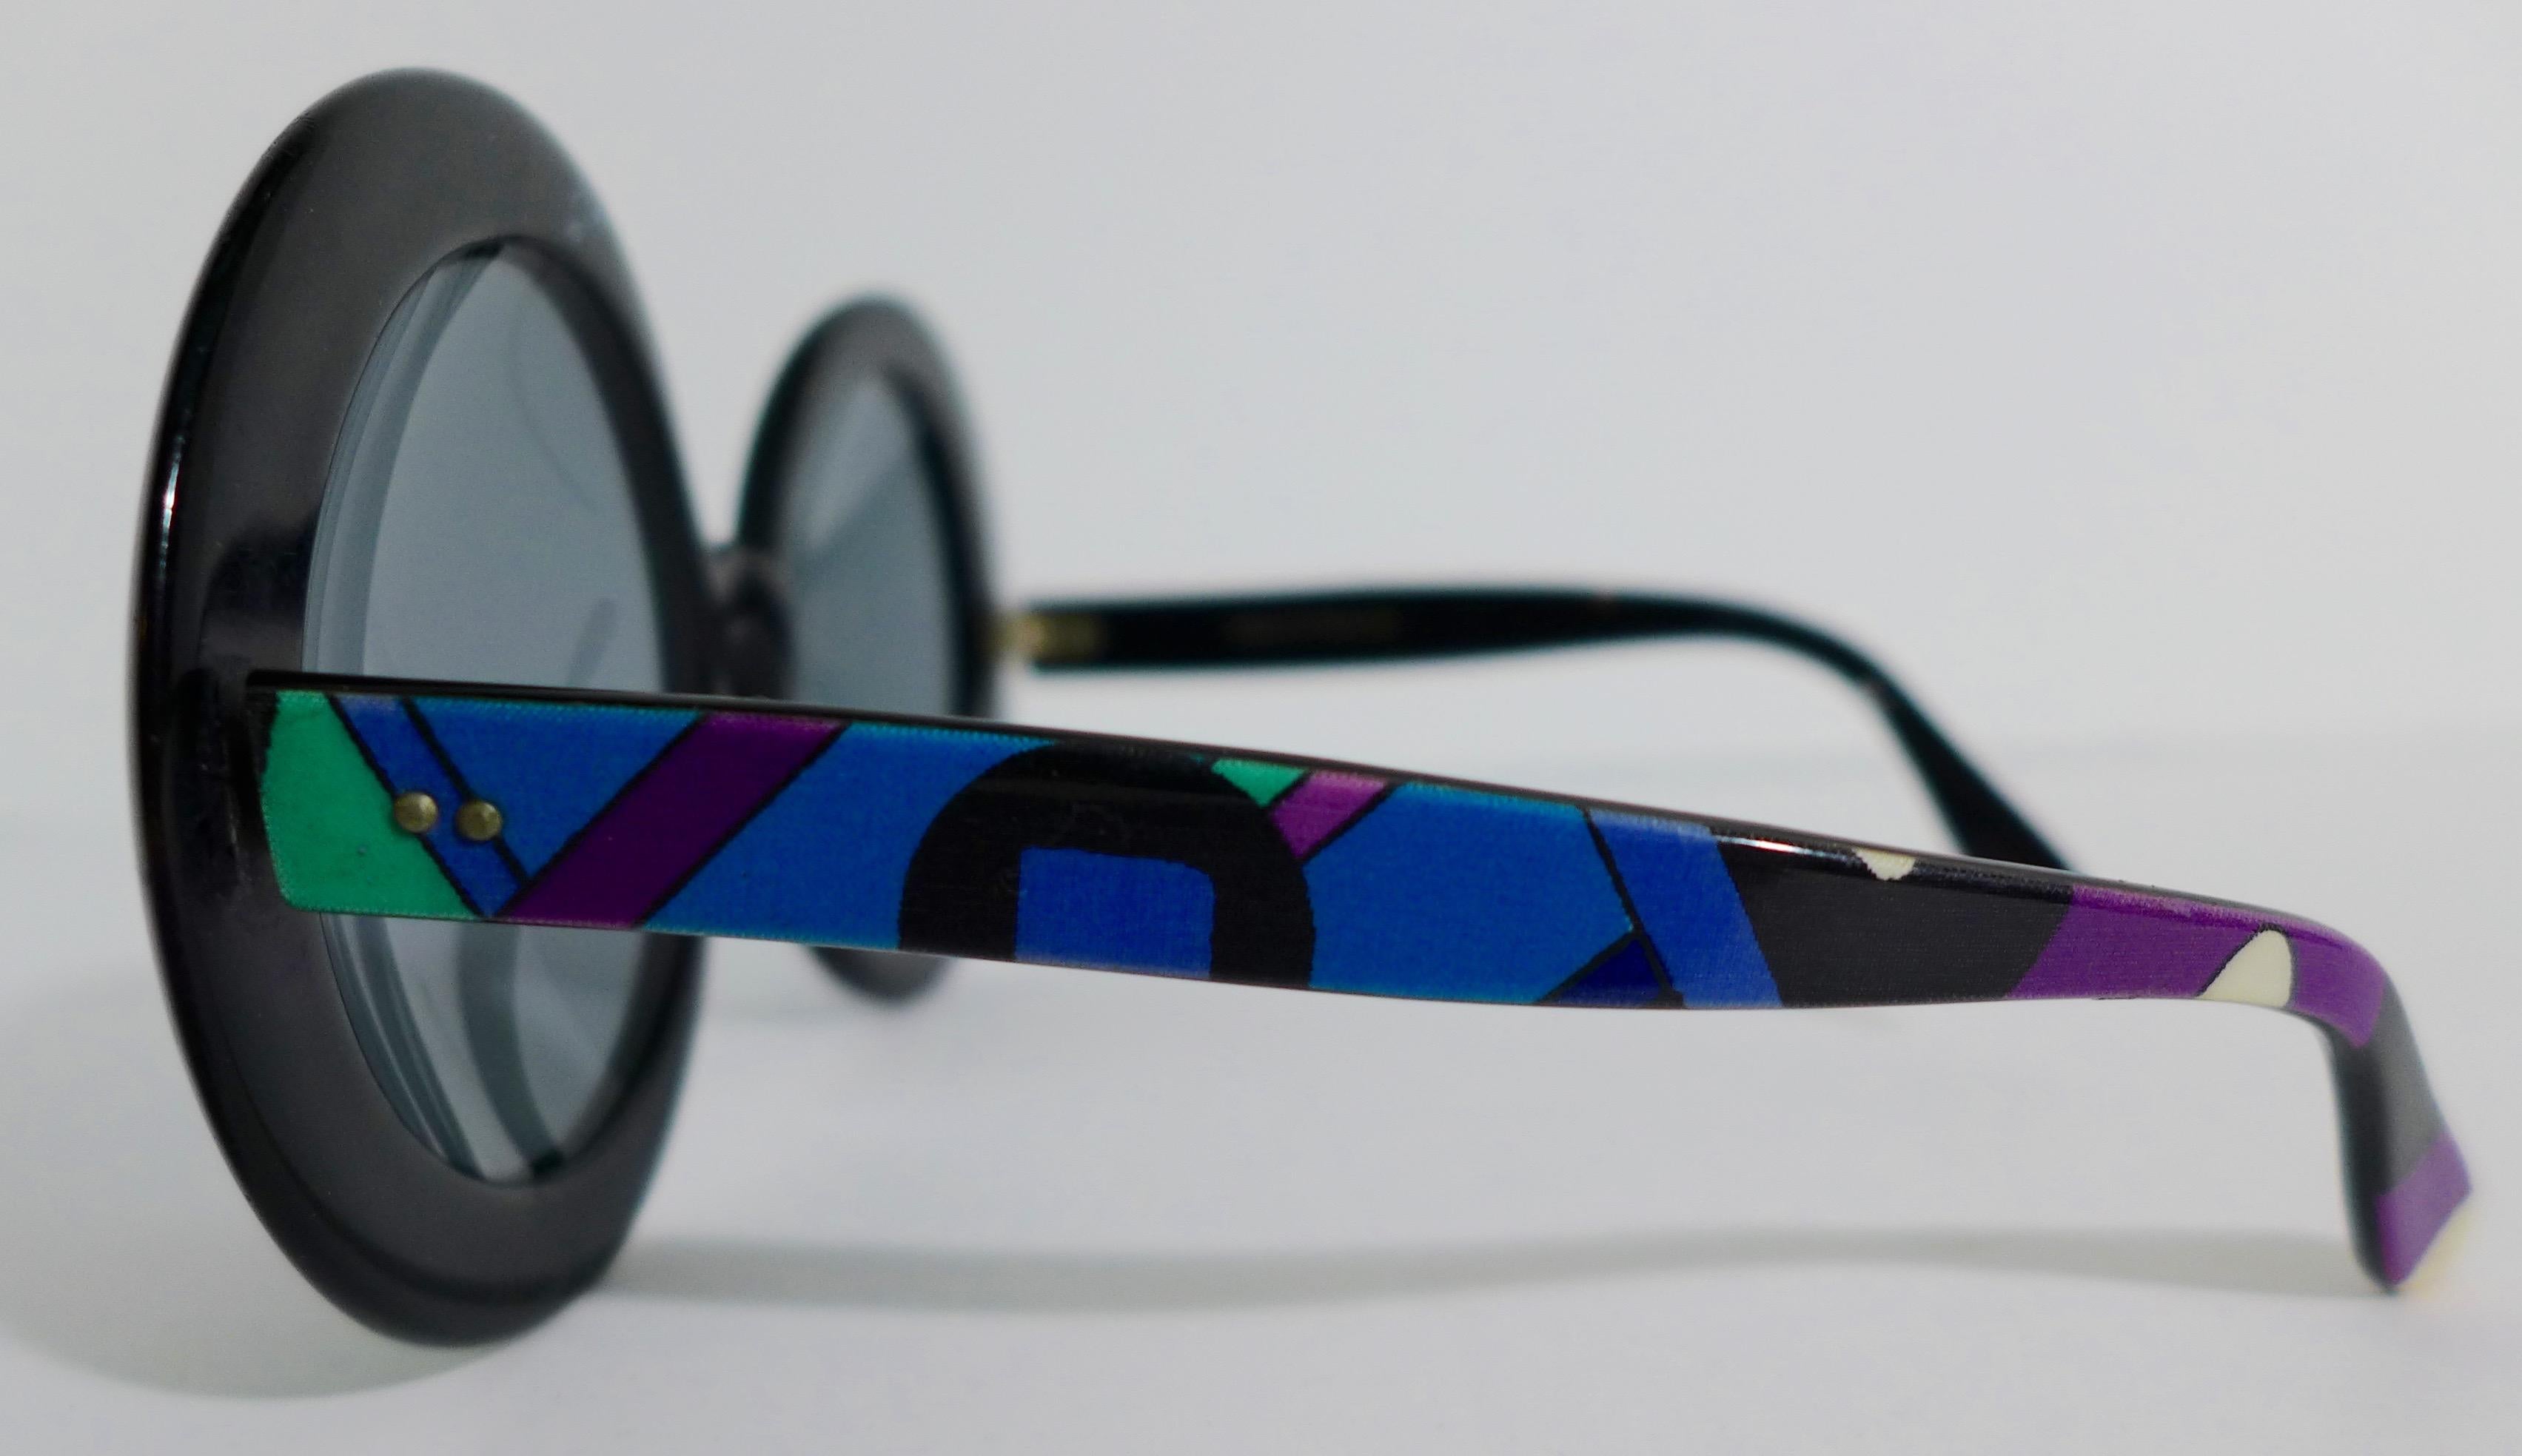 These Emilio Pucci round plastic sunglasses feature a classic blue, green, and purple print. The lenses are black. Made in France. 

Measurements in Inches: 
Width: 6.5 
Height: 3
Length: 5.5